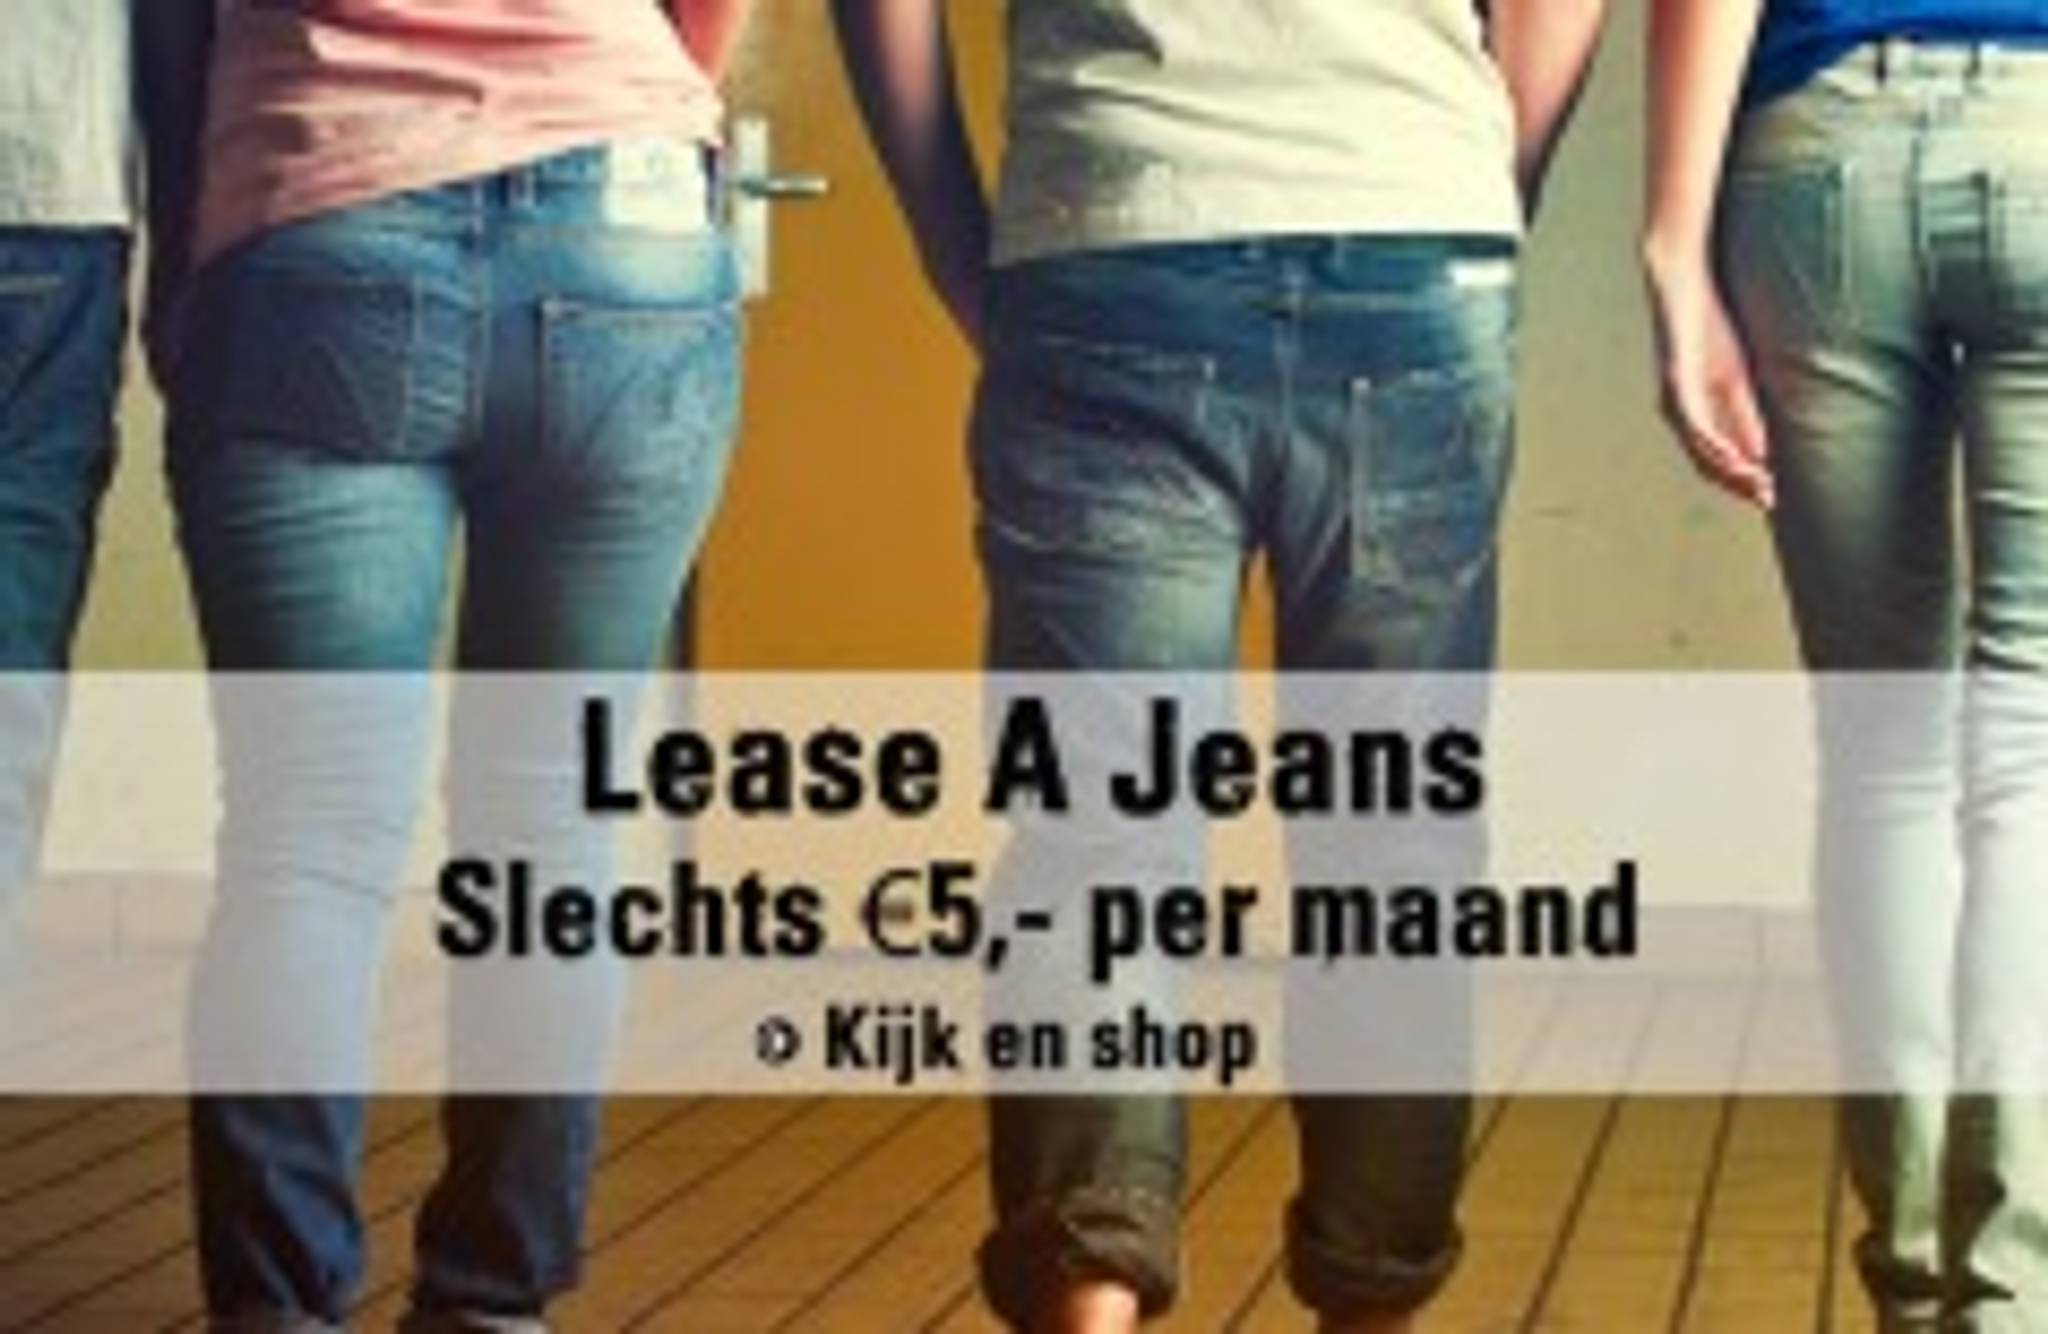 Leasing jeans rather than buying